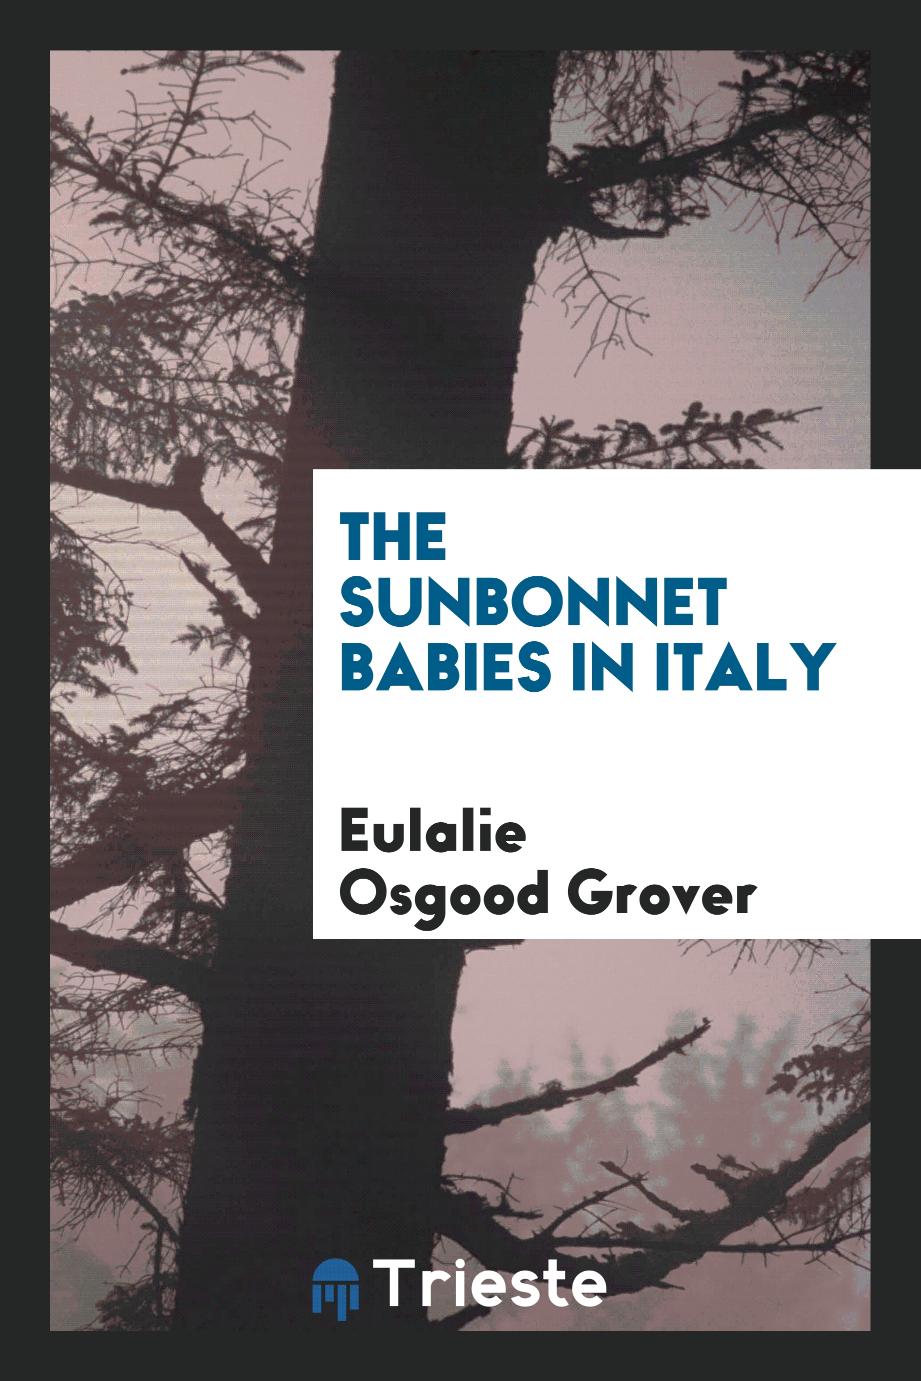 The sunbonnet babies in Italy